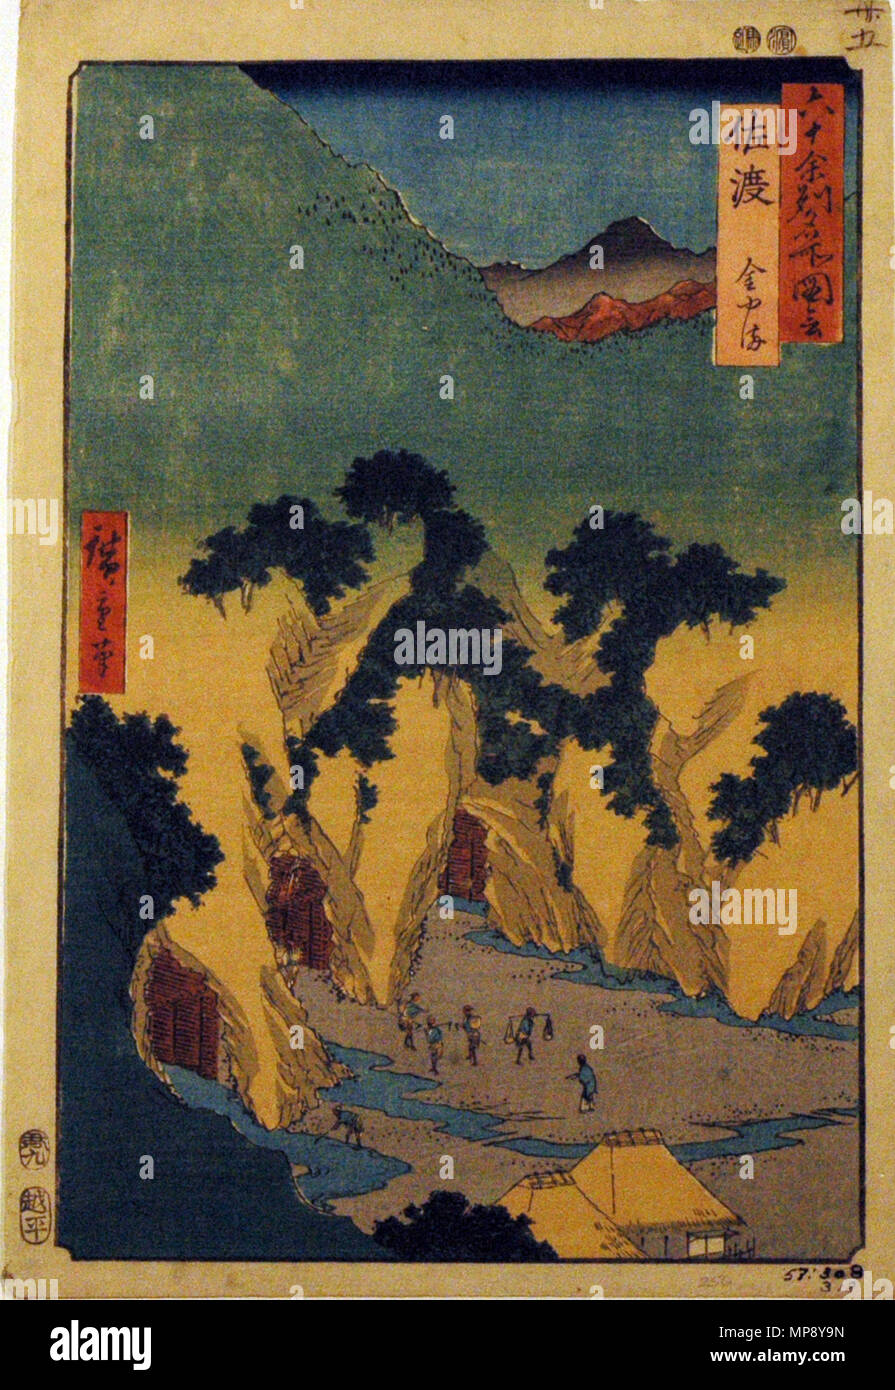 . English: Accession Number: 1957.319 Display Artist: Utagawa Hiroshige Display Title: 'Sado Province, The Goldmines' Translation(s): '(Sado, Kanayama)' Series Title: Famous Views of the Sixty-odd Provinces Suite Name: Rokujuyoshu meisho zue Creation Date: 1853 Medium: Woodblock Height: 13 9/16 in. Width: 9 in. Display Dimensions: 13 9/16 in. x 9 in. (34.45 cm x 22.86 cm) Publisher: Koshimuraya Heisuke Credit Line: Bequest of Mrs. Cora Timken Burnett Label Copy: 'One of Series: Rokuju ye Shin. Meisho dzu. ''Views of 60 or More Provinces''. Published by Koshei kei in 1853-1856. Included in this Stock Photo